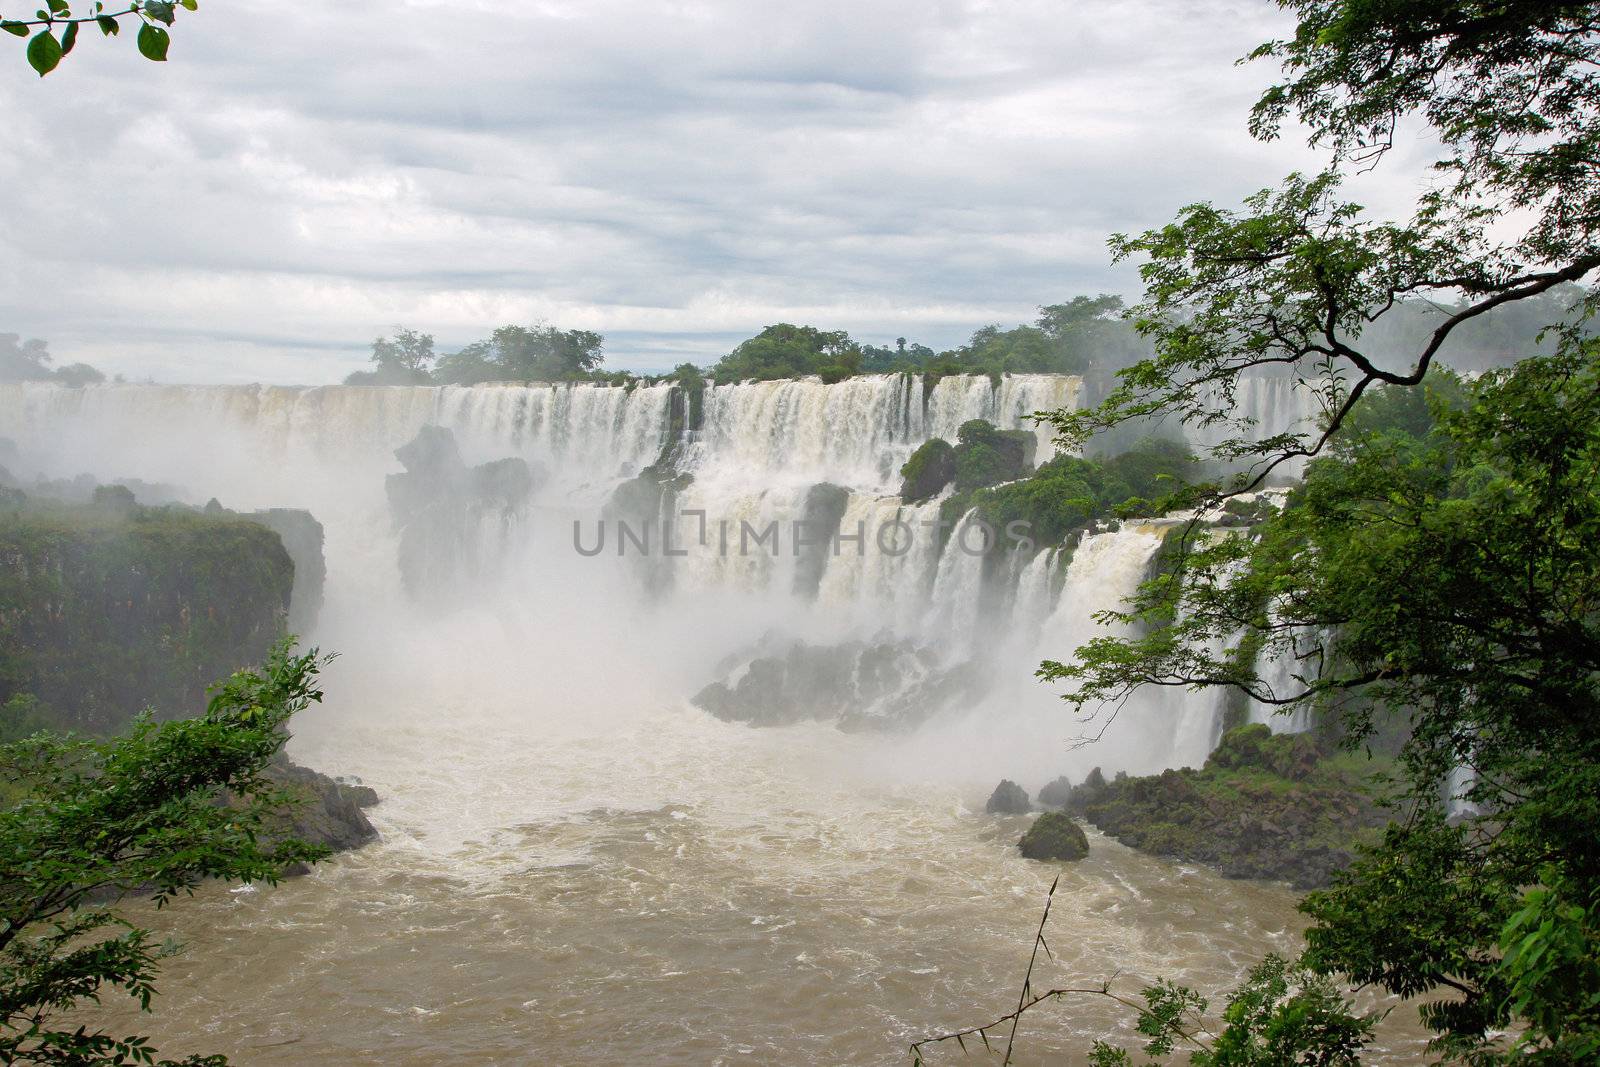 Waterfalls of Iguazu, one of the biggest in the world, Argentina, South America